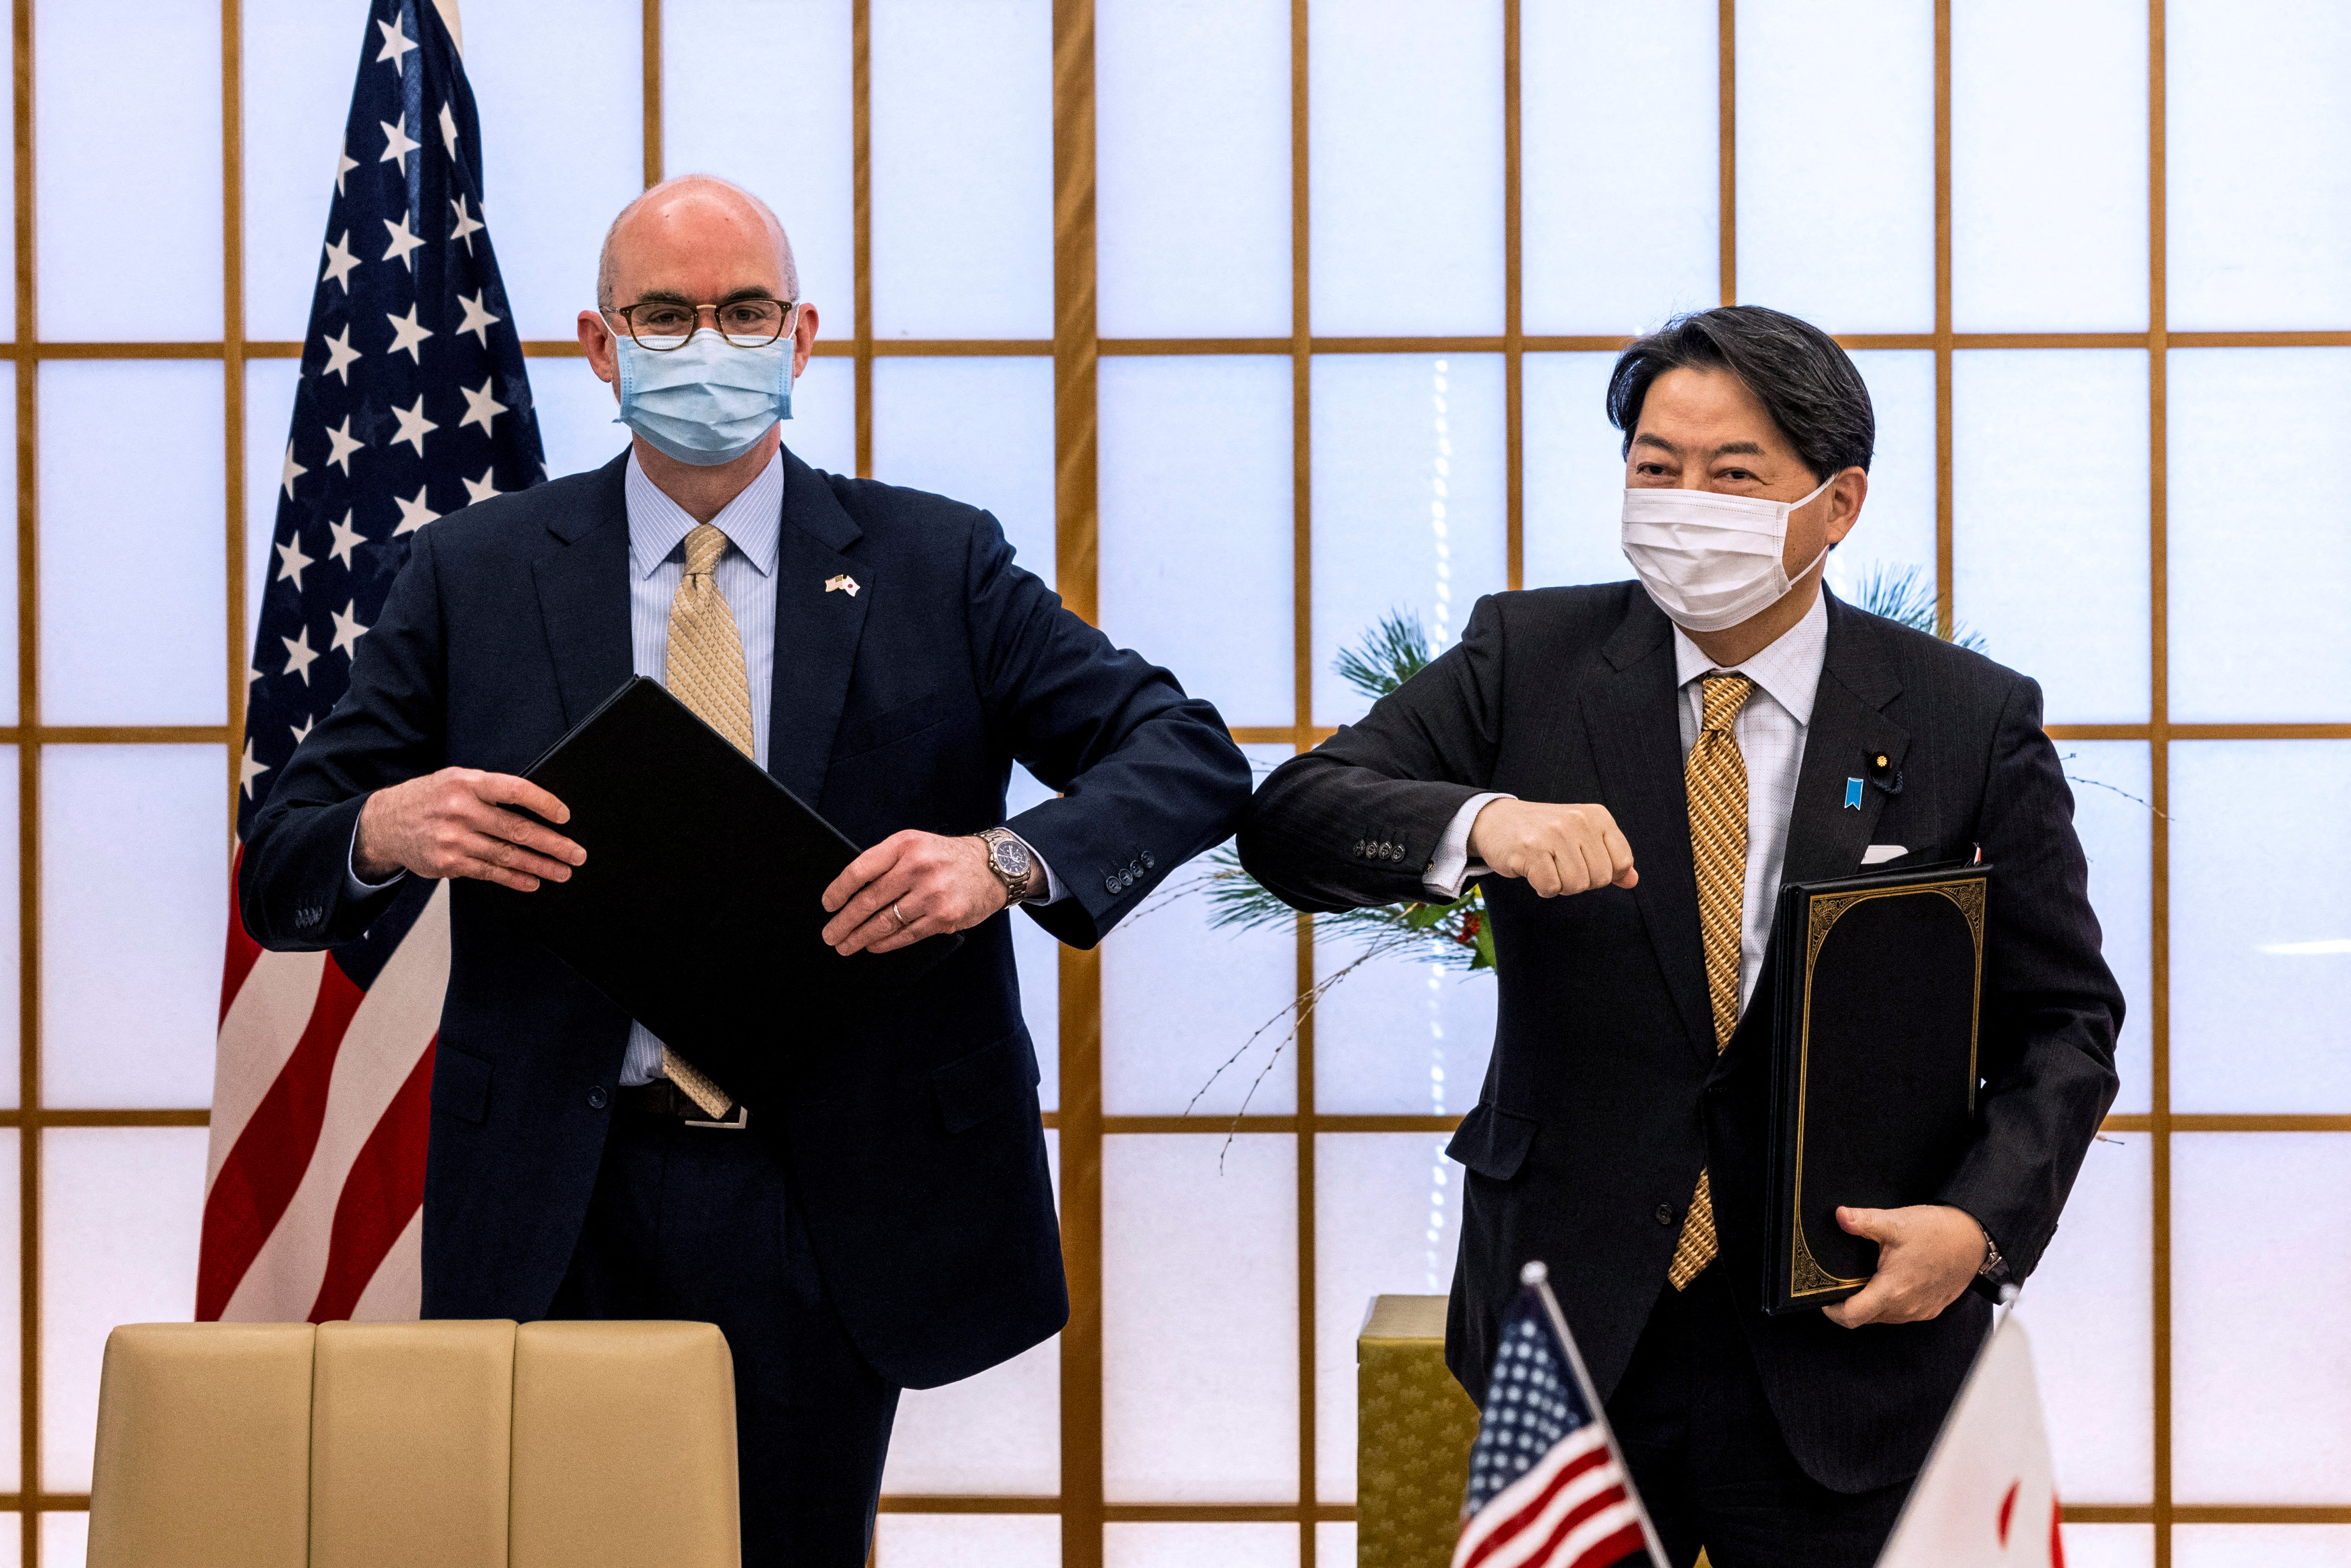 Japan's Foreign Minister Yoshimasa Hayashi and Raymond F. Greene, charge d'affairs ad interim of the U.S. embassy in Japan bump elbows after signing the New Special Measures Agreement (SMA) and Japan-U.S. Joint Research in Tokyo